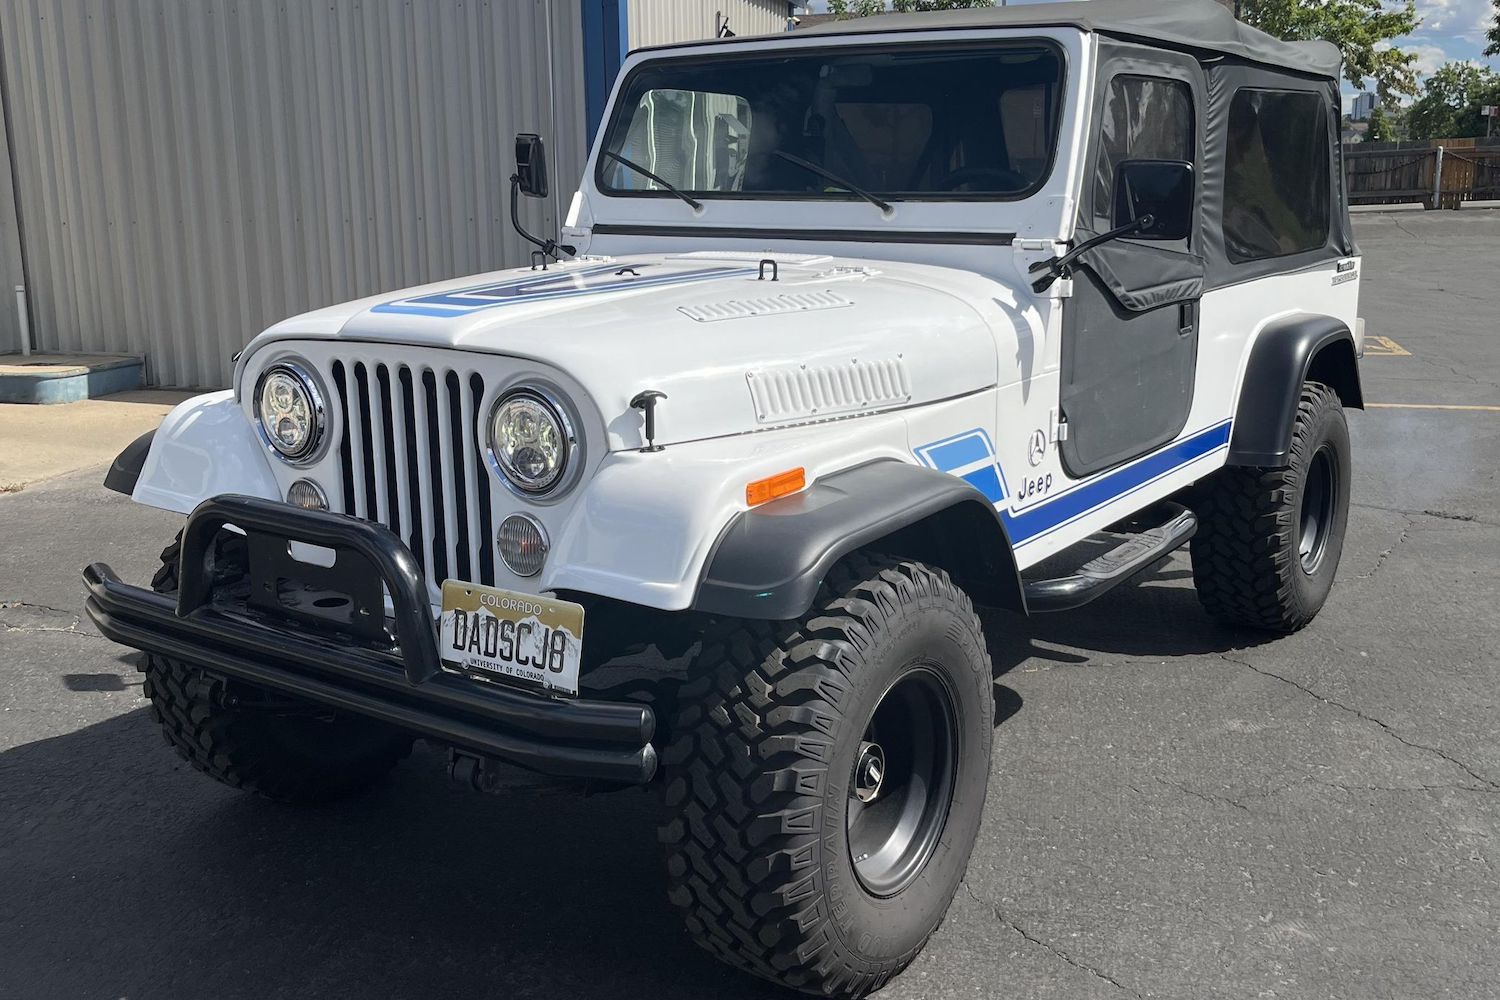 The Jeep grille of a white CJ-8 Scrambler 4x4 restomod with Mercedes turbodiesel badges, a car dealership visible in the background.